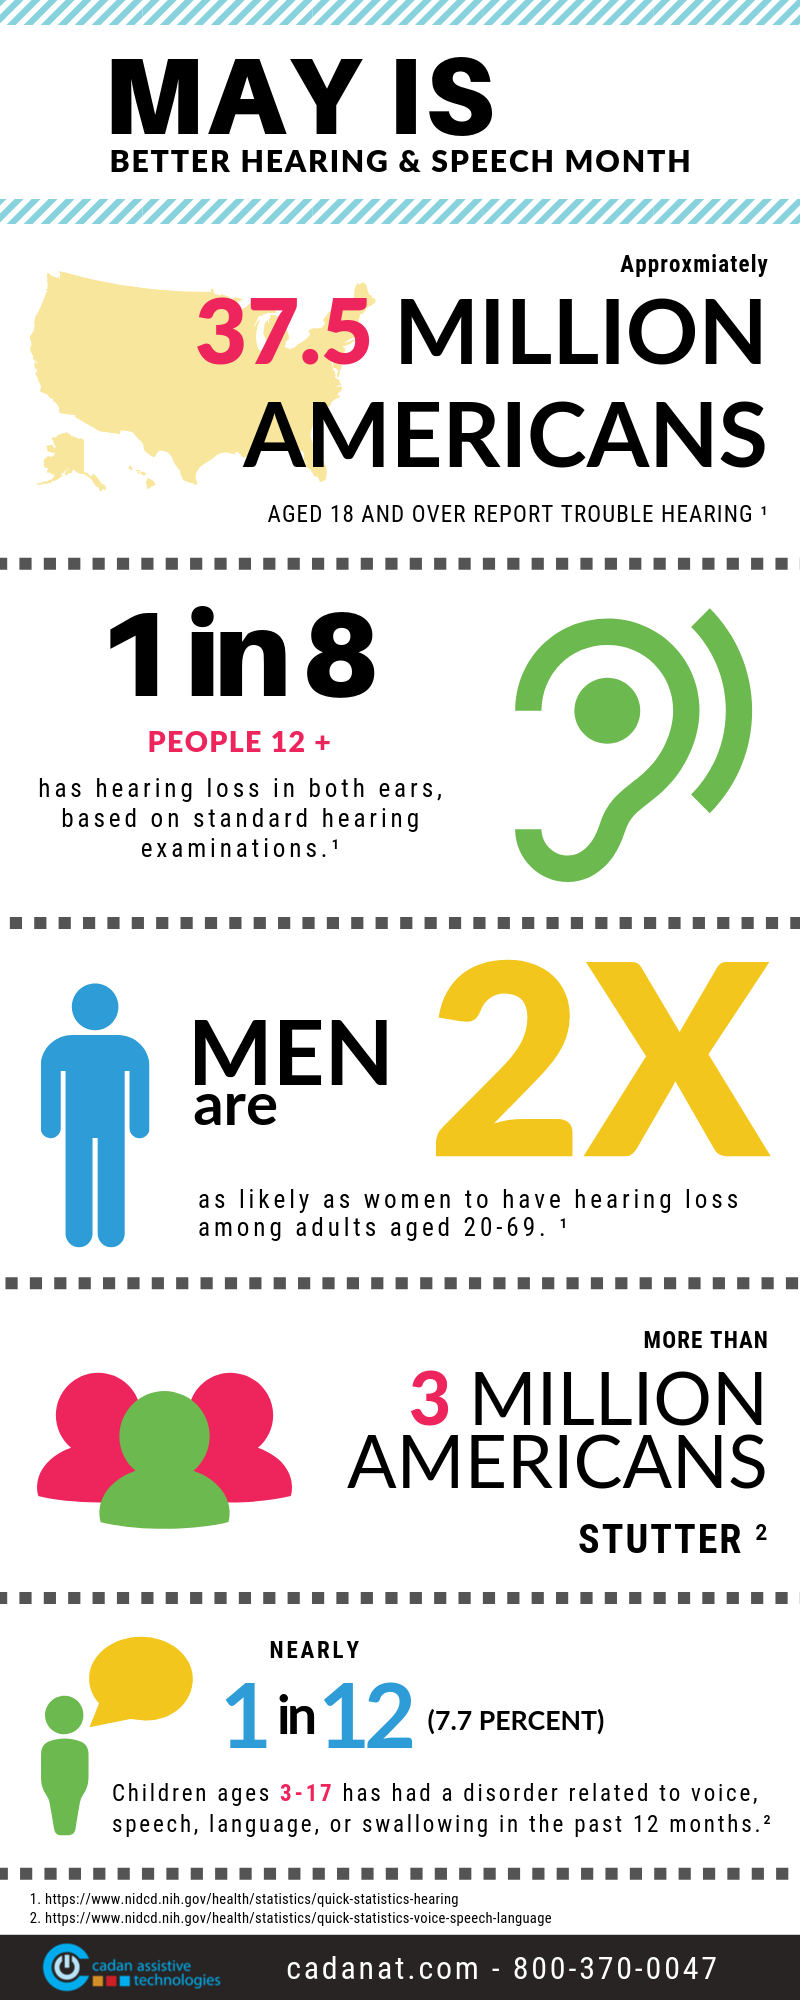 May is Better Hearing & Speech Month Infographic